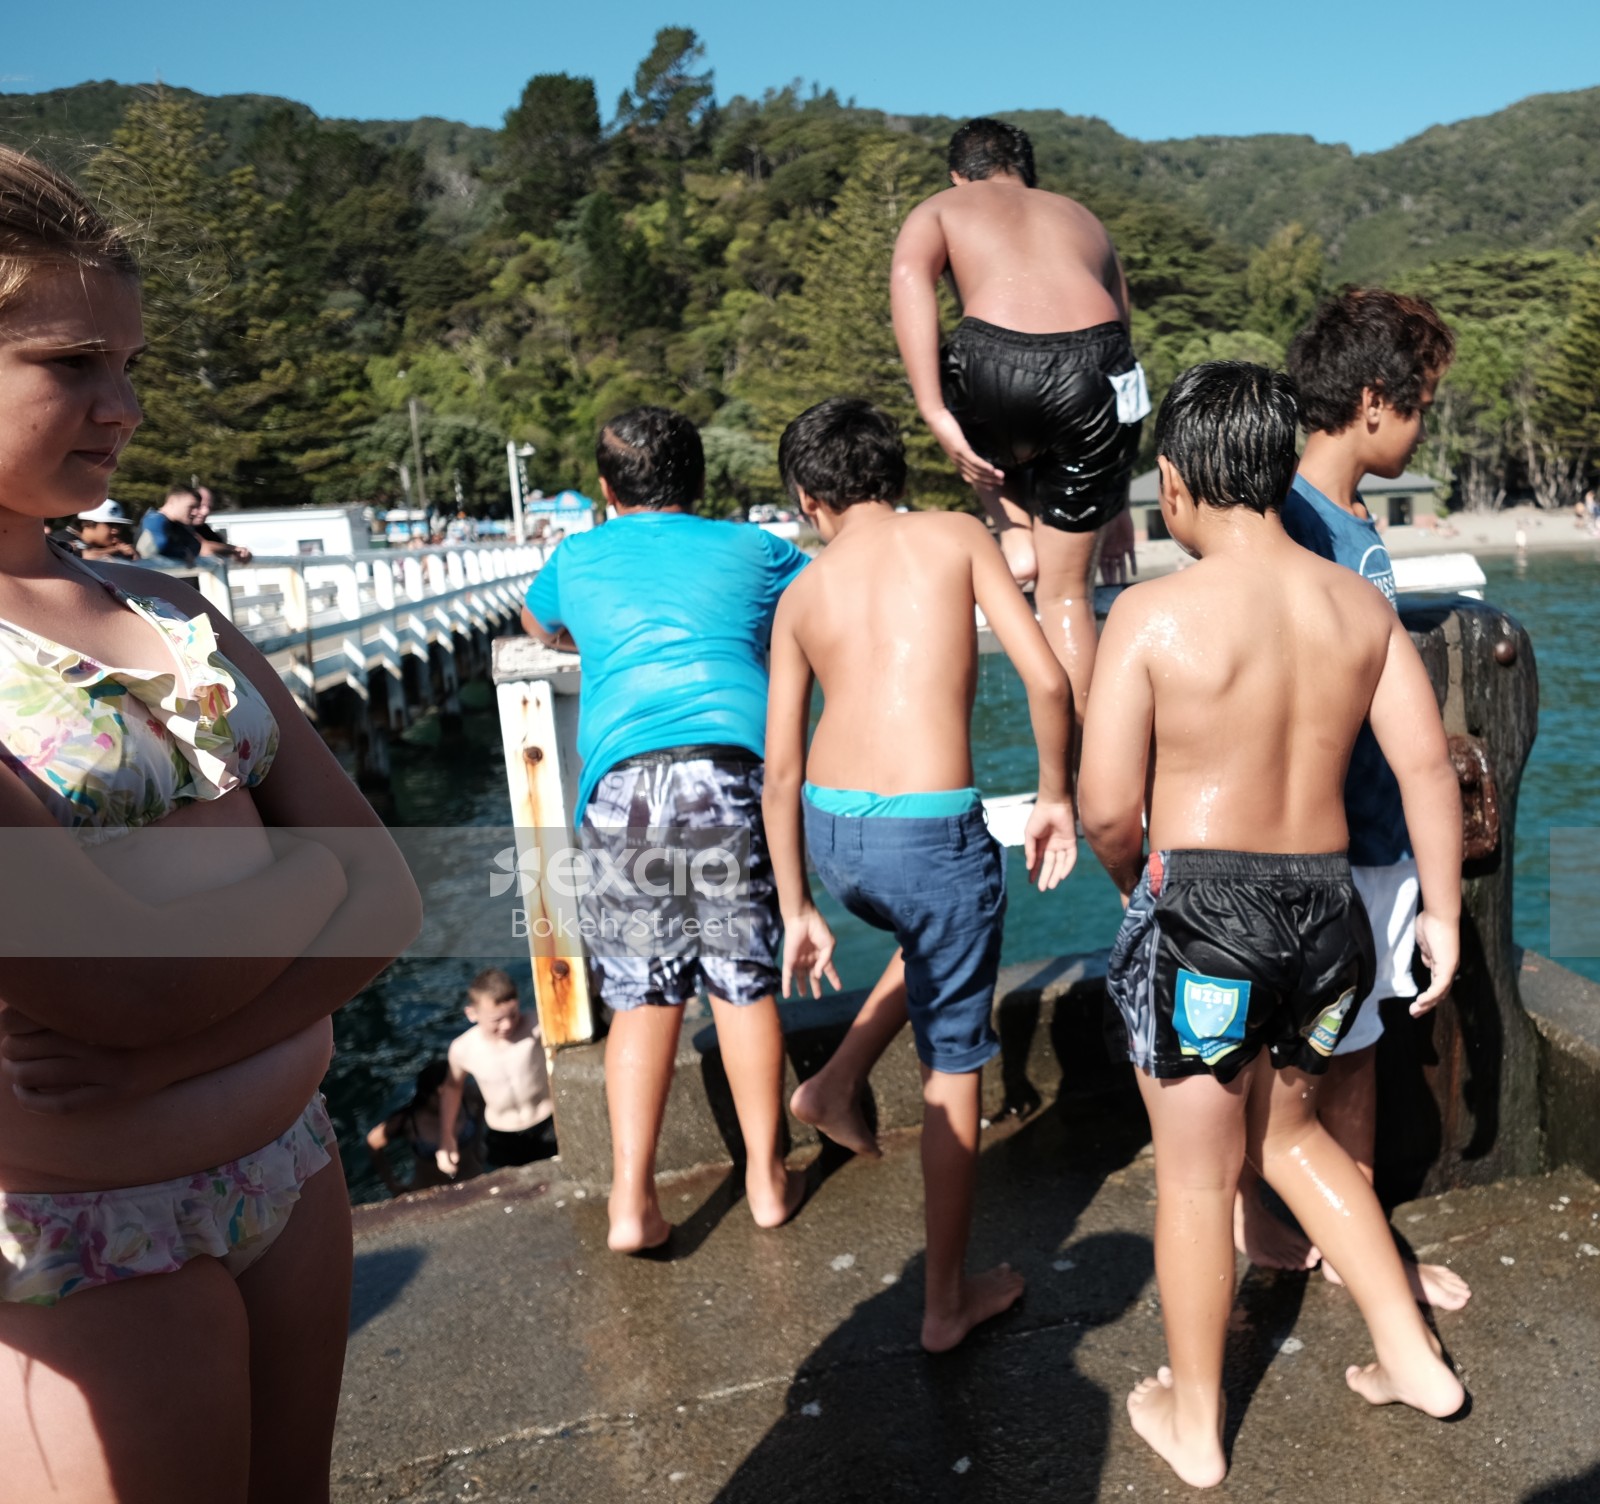 Kids waiting their turn to jump in the water at Days bay